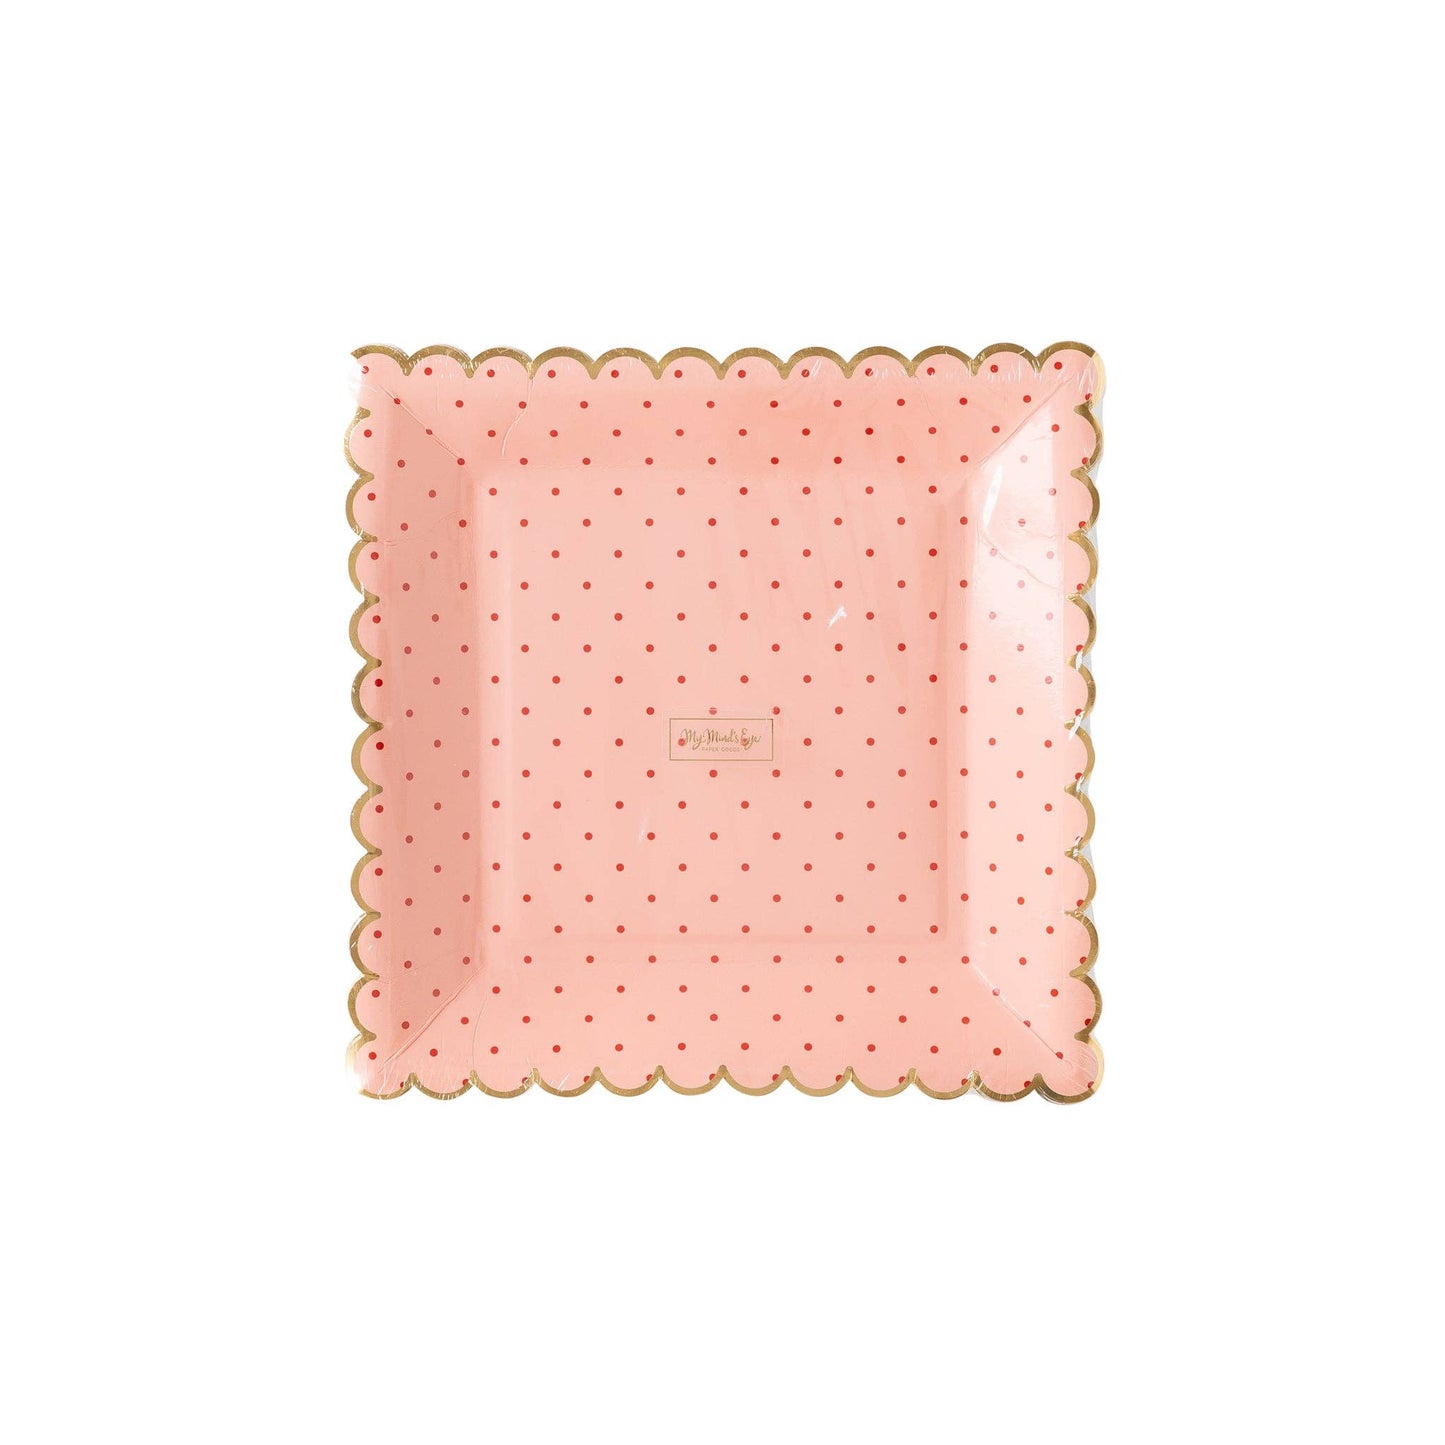 Square Scallop Plates: Pink With Polka Dot